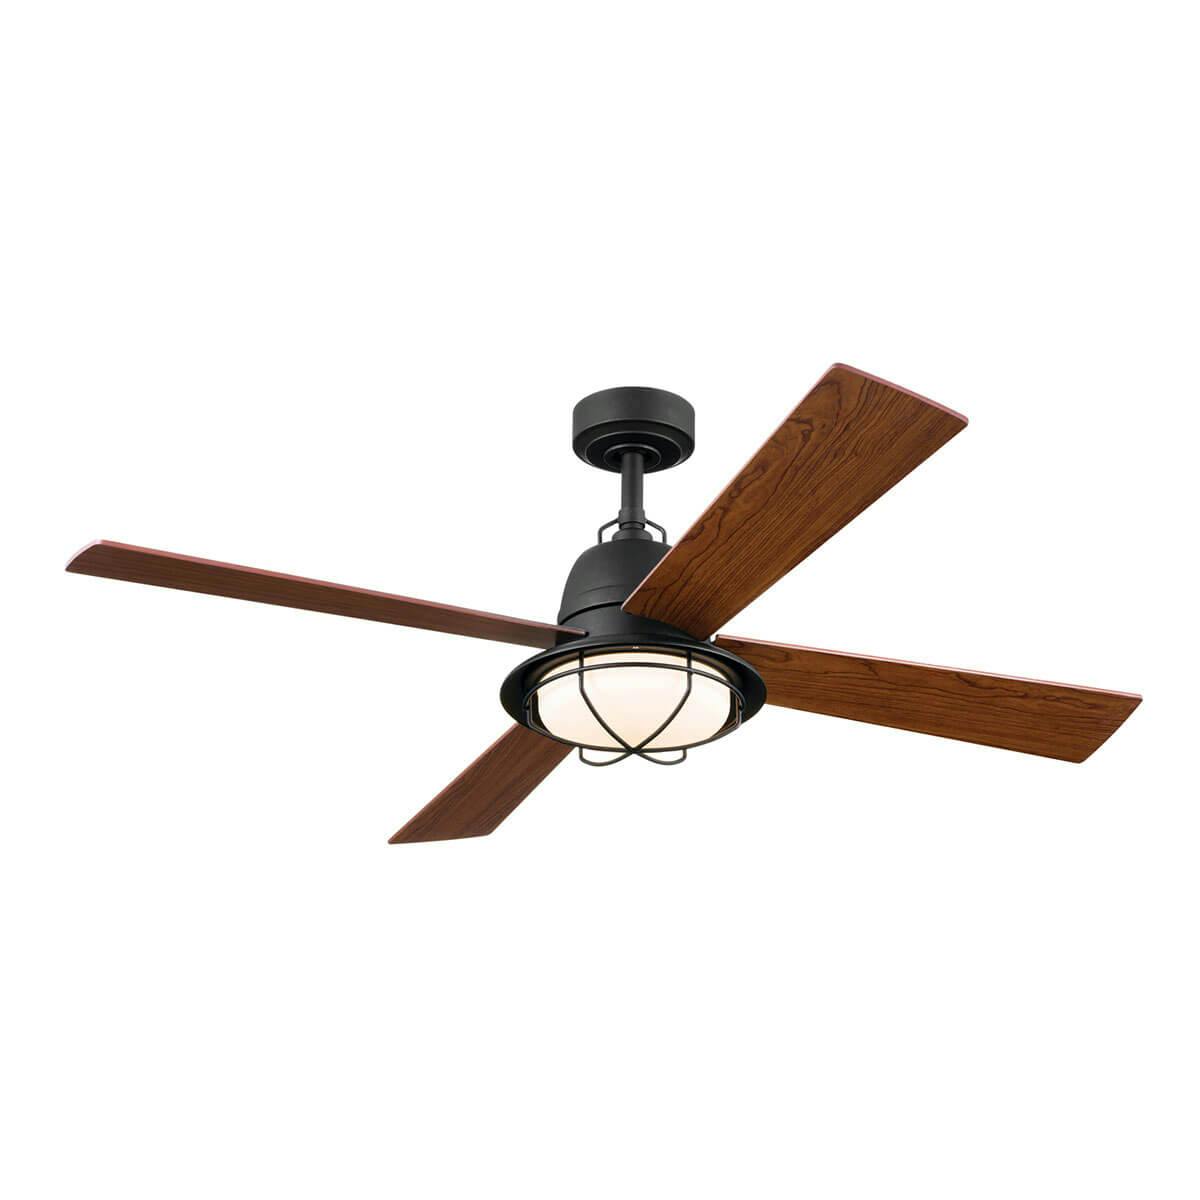 Parlour 52" Ceiling Fan Distressed Black on a white background